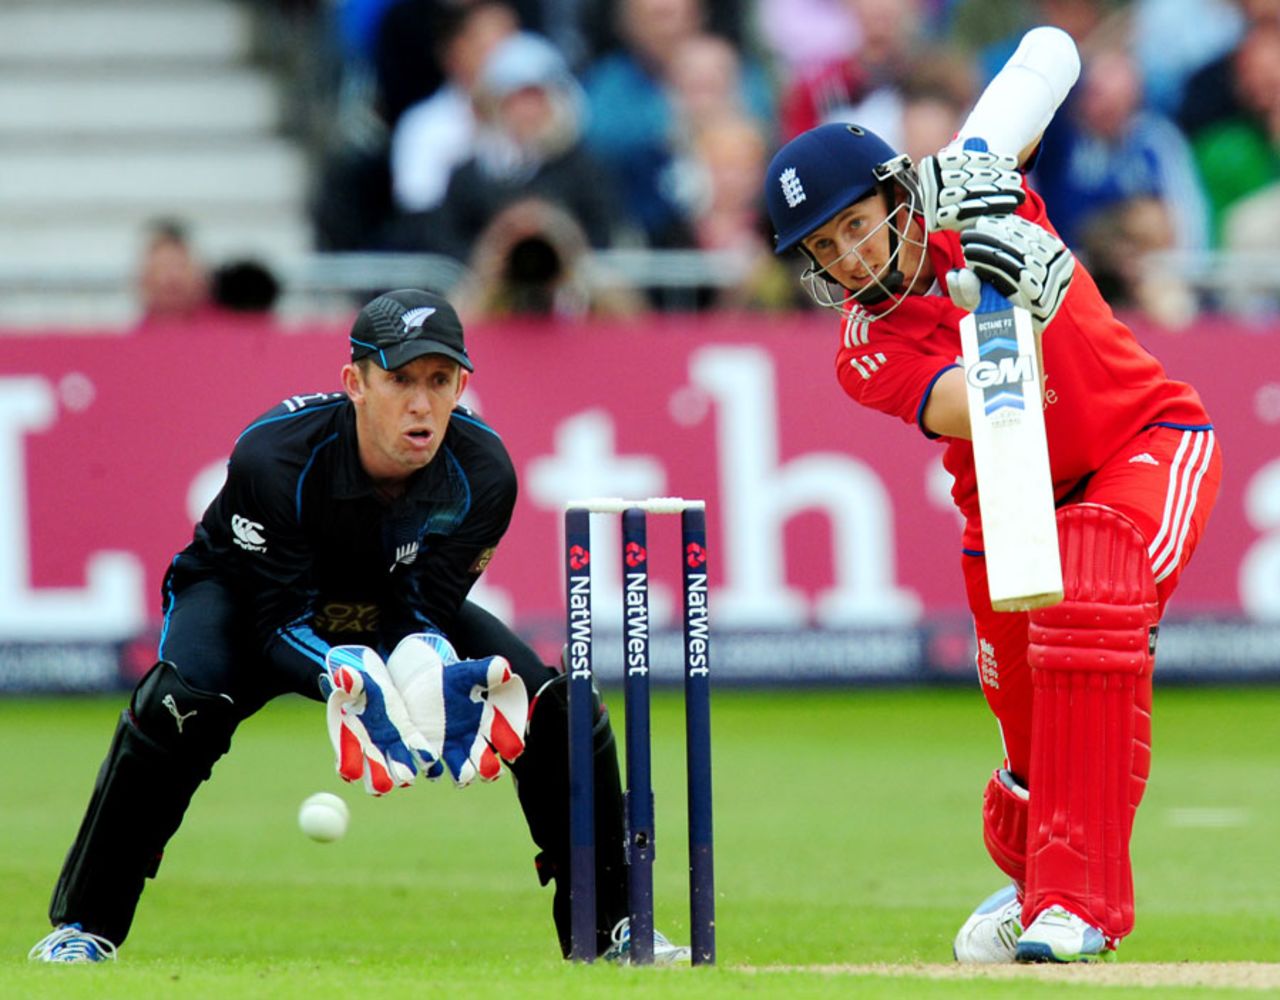 Joe Root punches into the off side, England v New Zealand, 2nd ODI, Trent Bridge, June 5, 2013